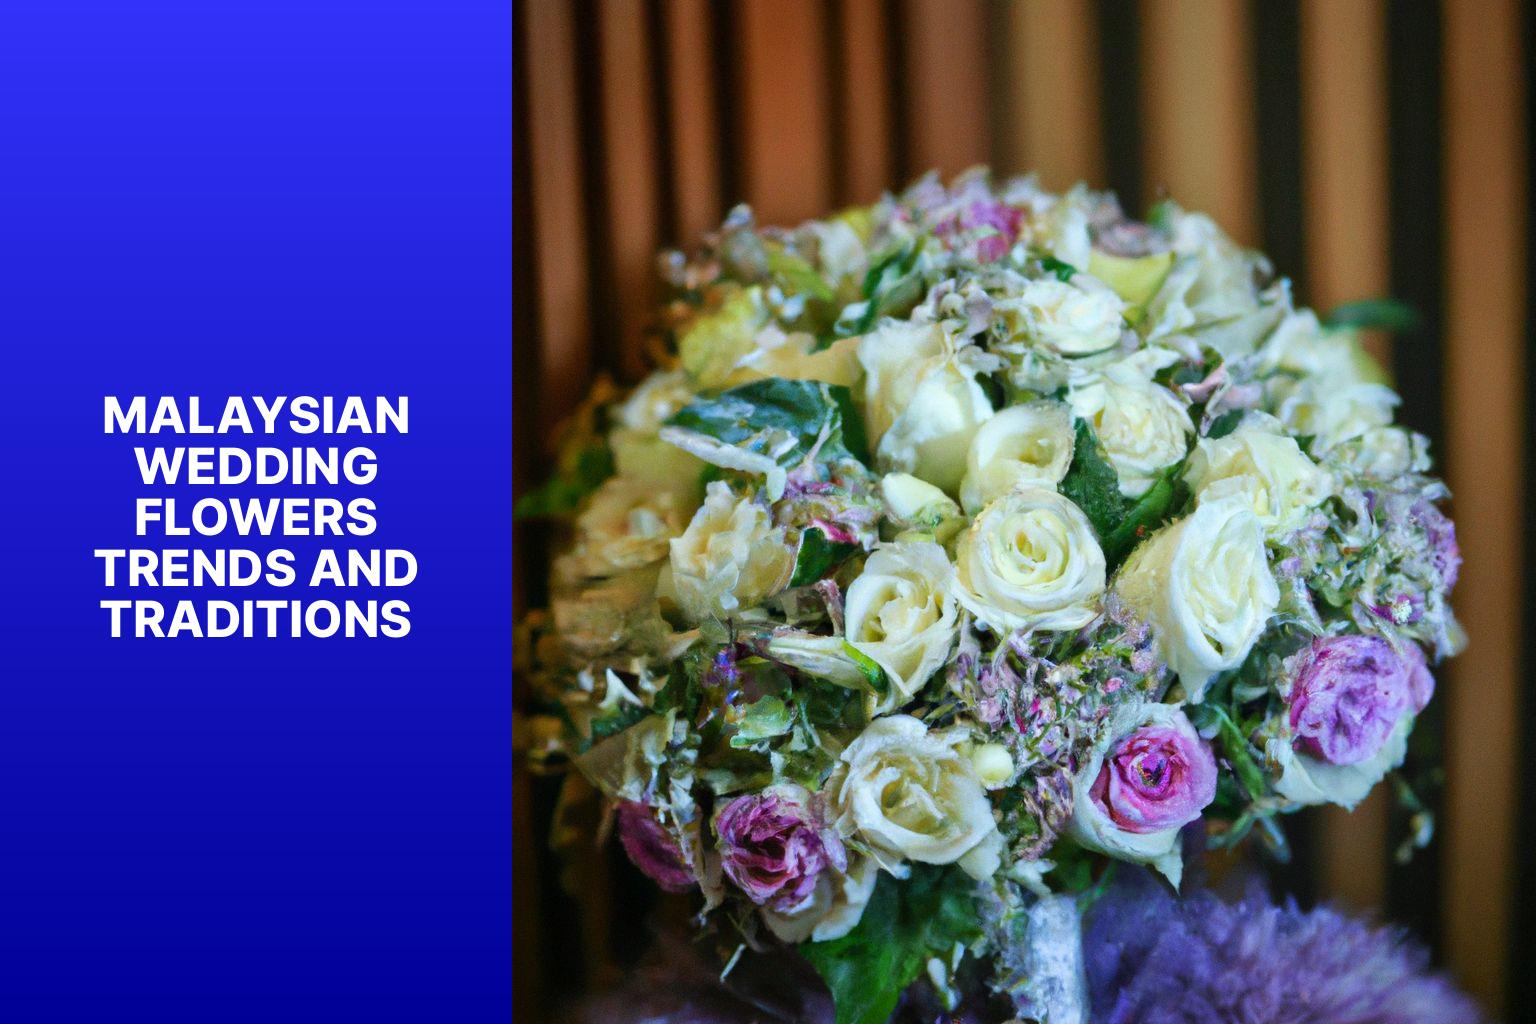 Malaysian Wedding Flowers Trends and Traditions